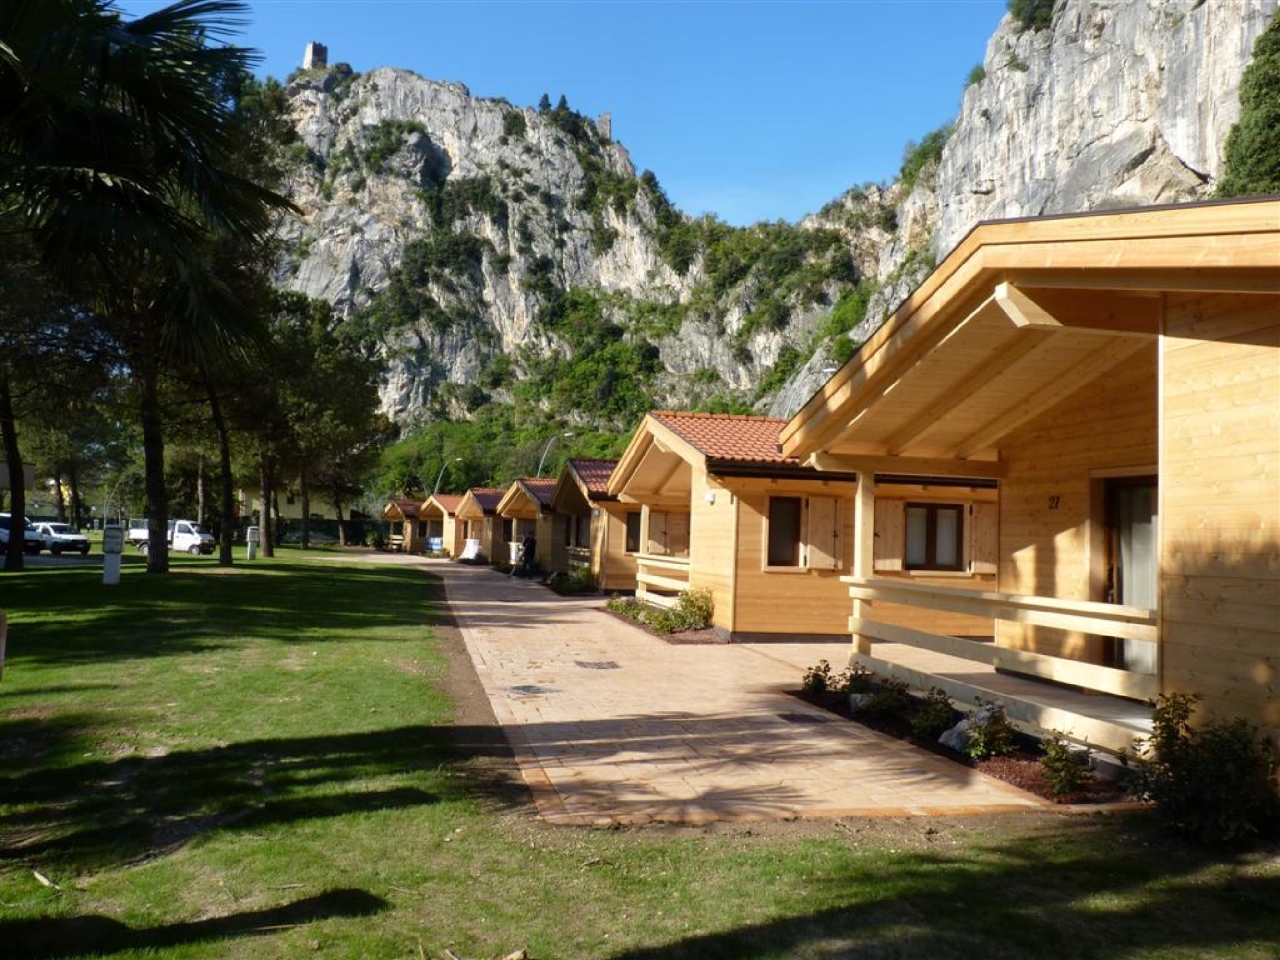 Camping Arco - a great place to relax on the Garda – main image